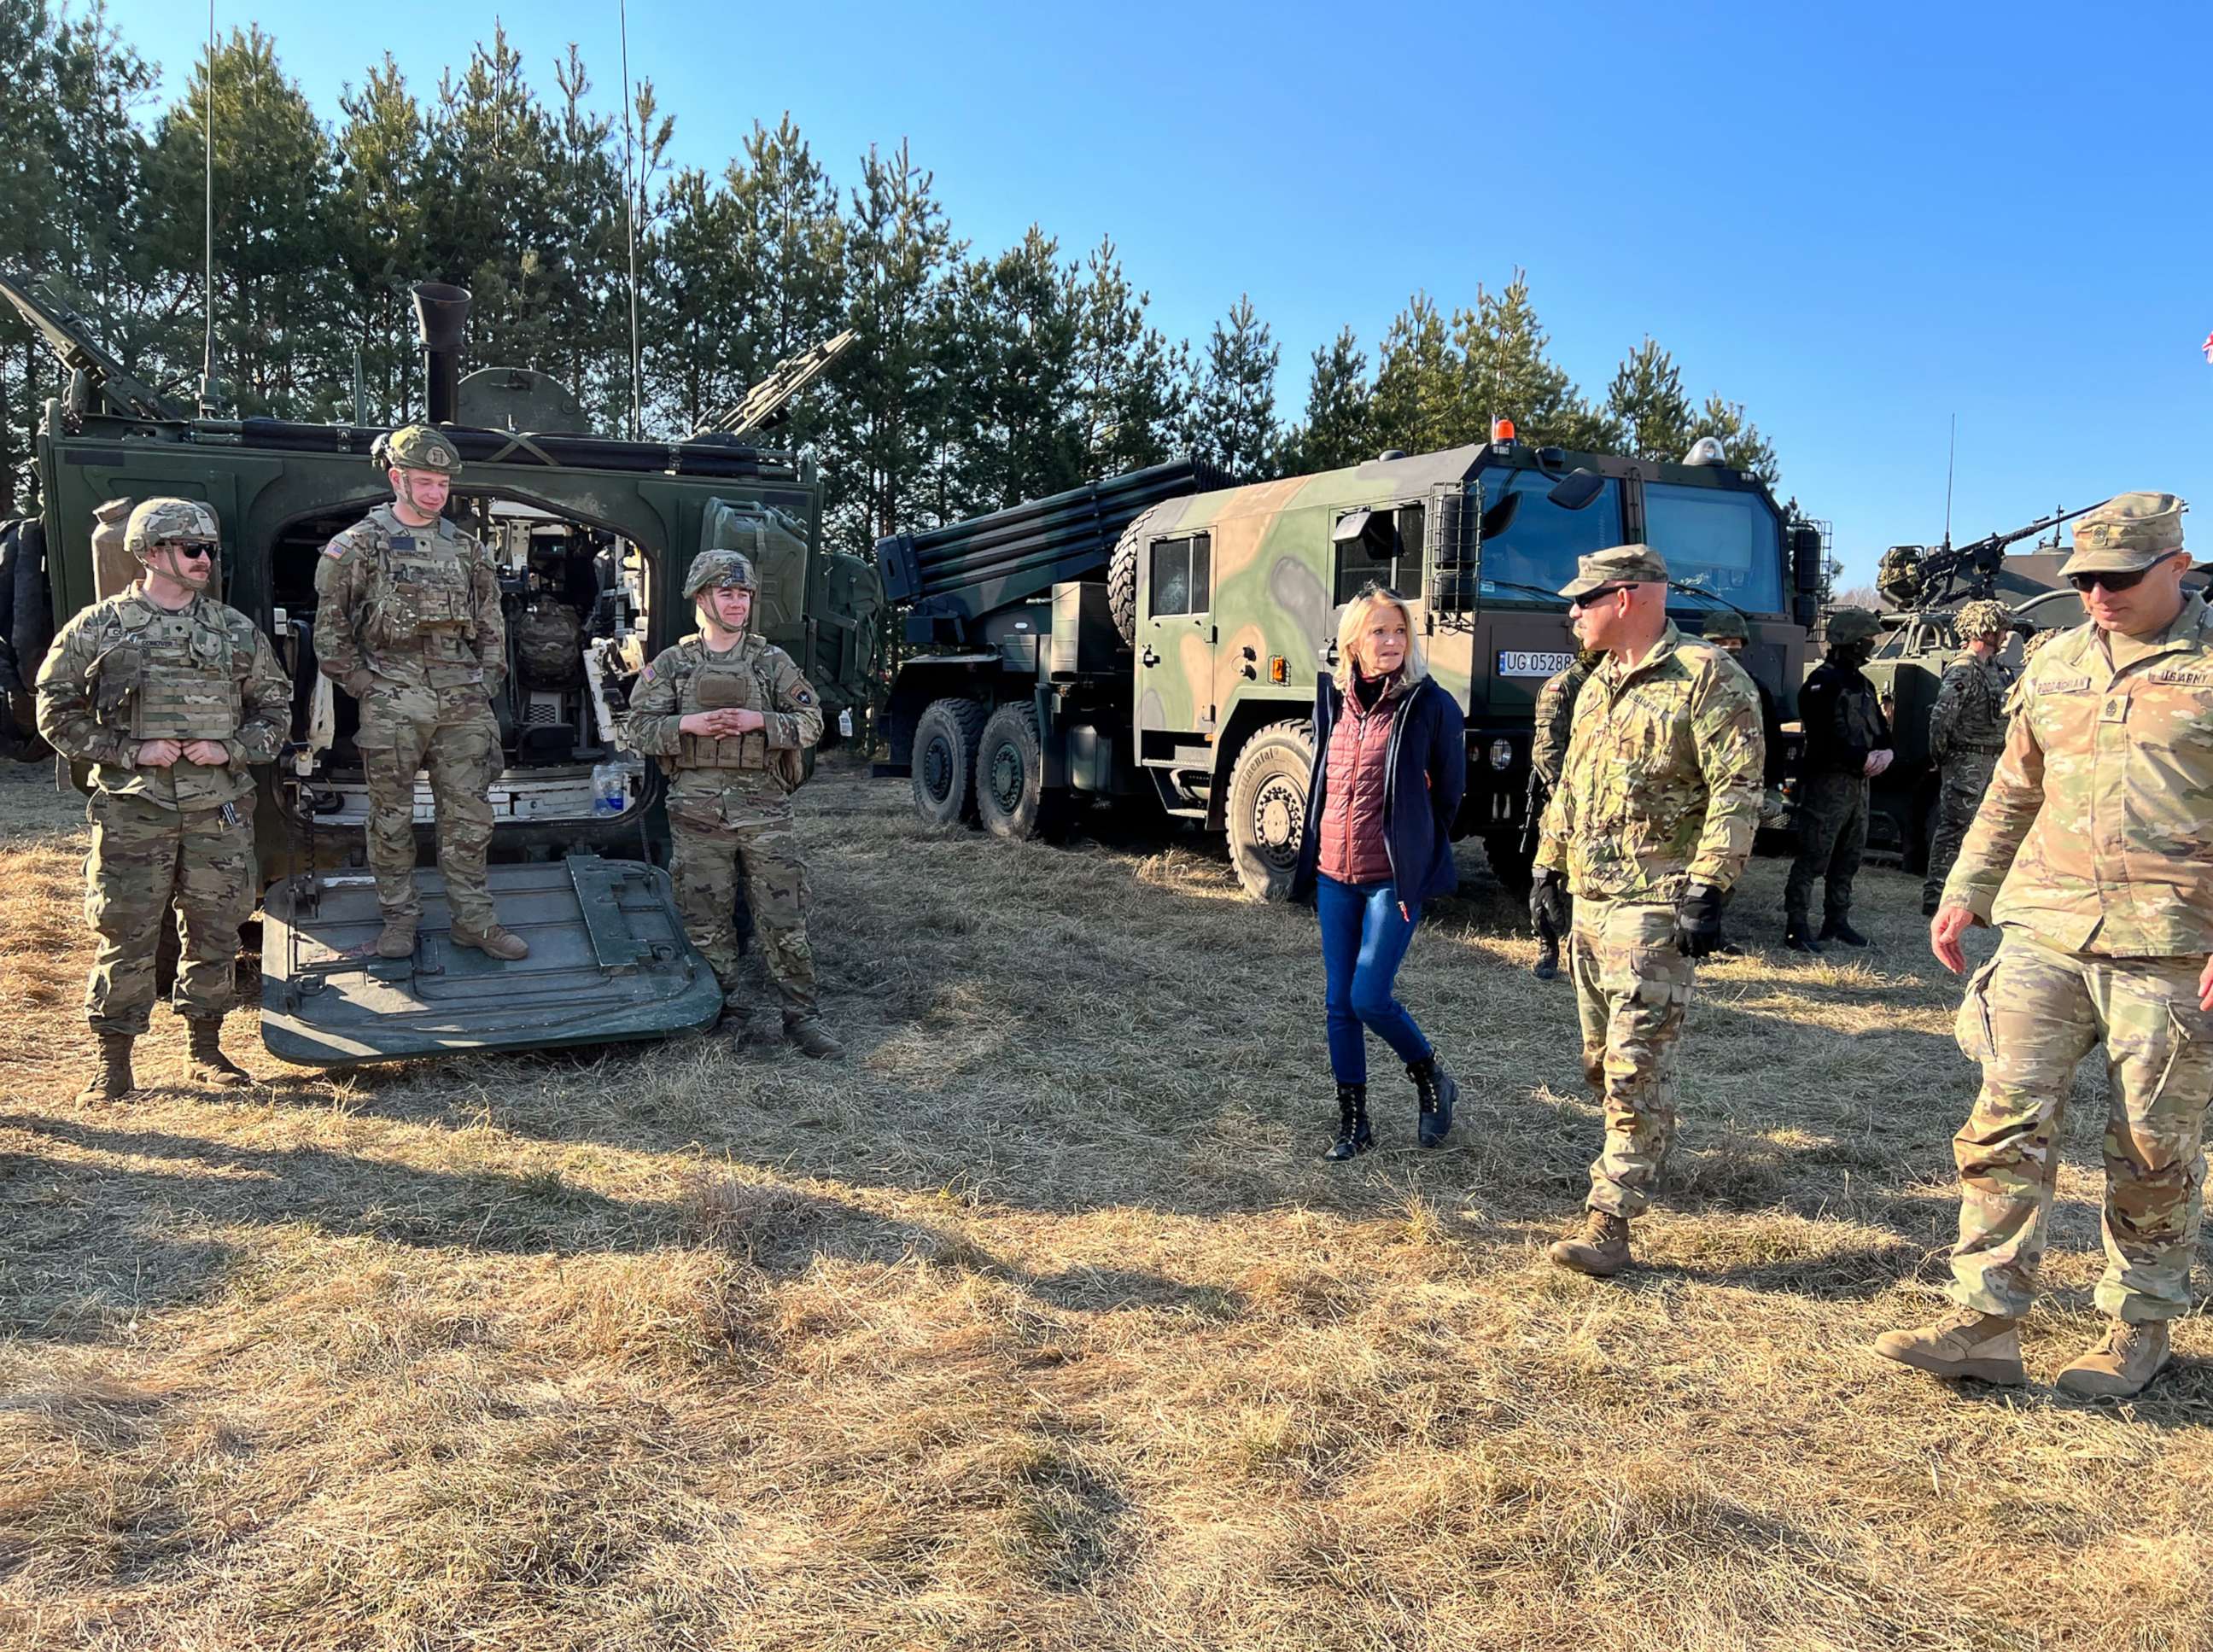 PHOTO: ABC's Martha Raddatz reporting from Poland, one of the countries abutting Russia that has received additional troops from the U.S. following the invasion of Ukraine.